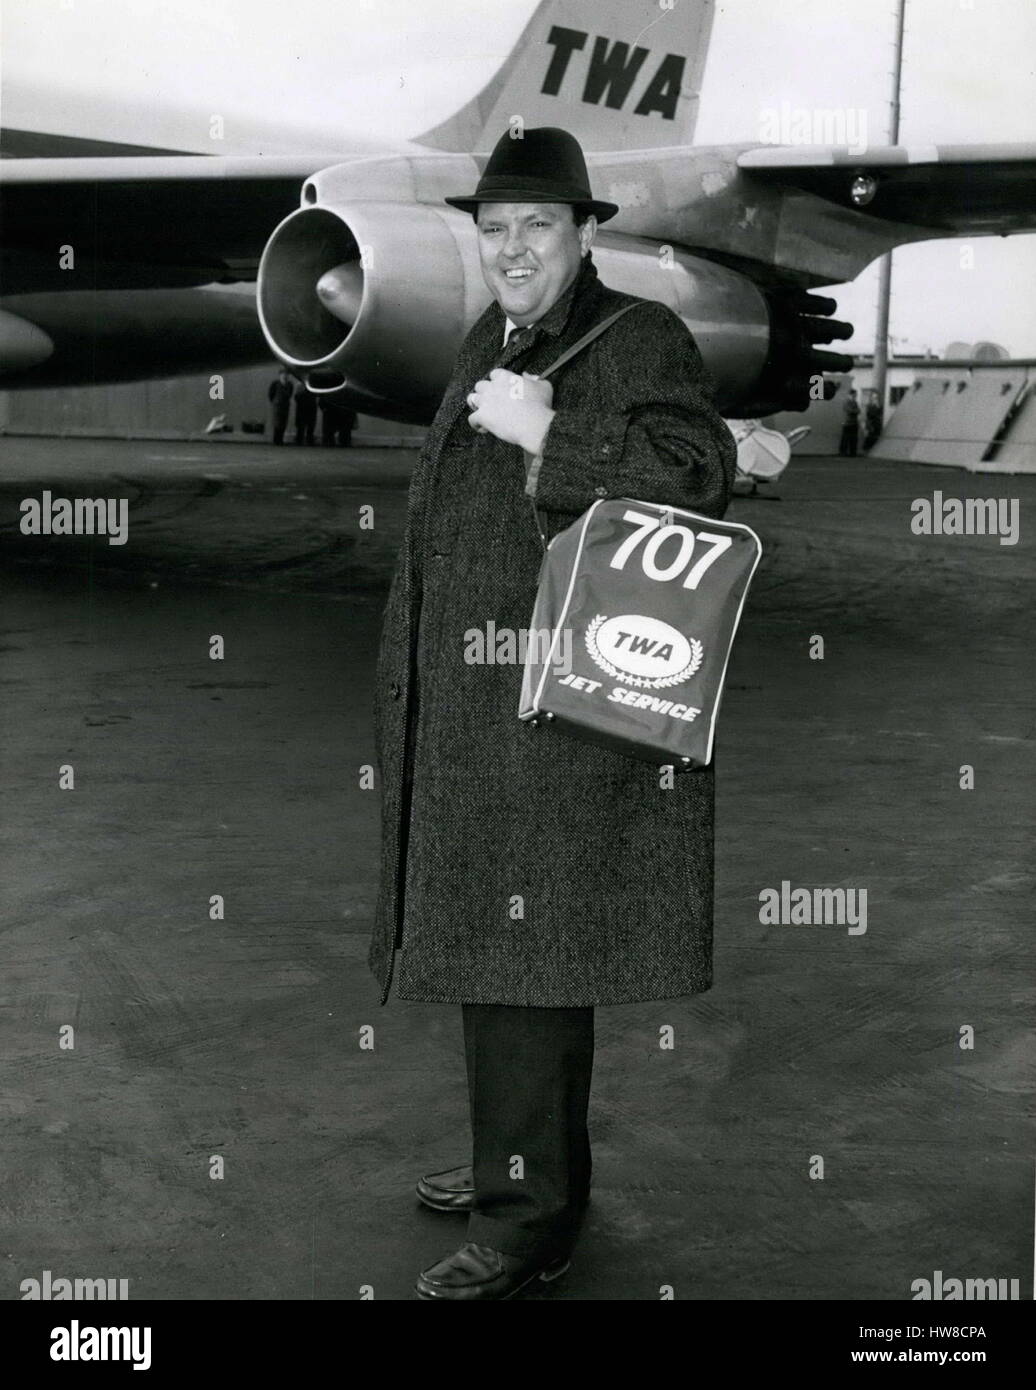 1962 - TWA's jet service to San Francisco started coincidently just in time to transport operatic Baritone Cornell MacNeil. Who has been singing in California with the cosmolitan opera, for an unexpected Metropolitan opera debut last night replacing Robert Merrill who is ill, and is seen here today prior to boarding TWA's JetLiner back again to San Francisco. The Cliffside park, N.J. sensation made a triumphant debut at La Scala on March 5 and has been following such a tight schedule that in his two brief stops through New York he hasn't had time to see his five children. The 34-year old forme Stock Photo